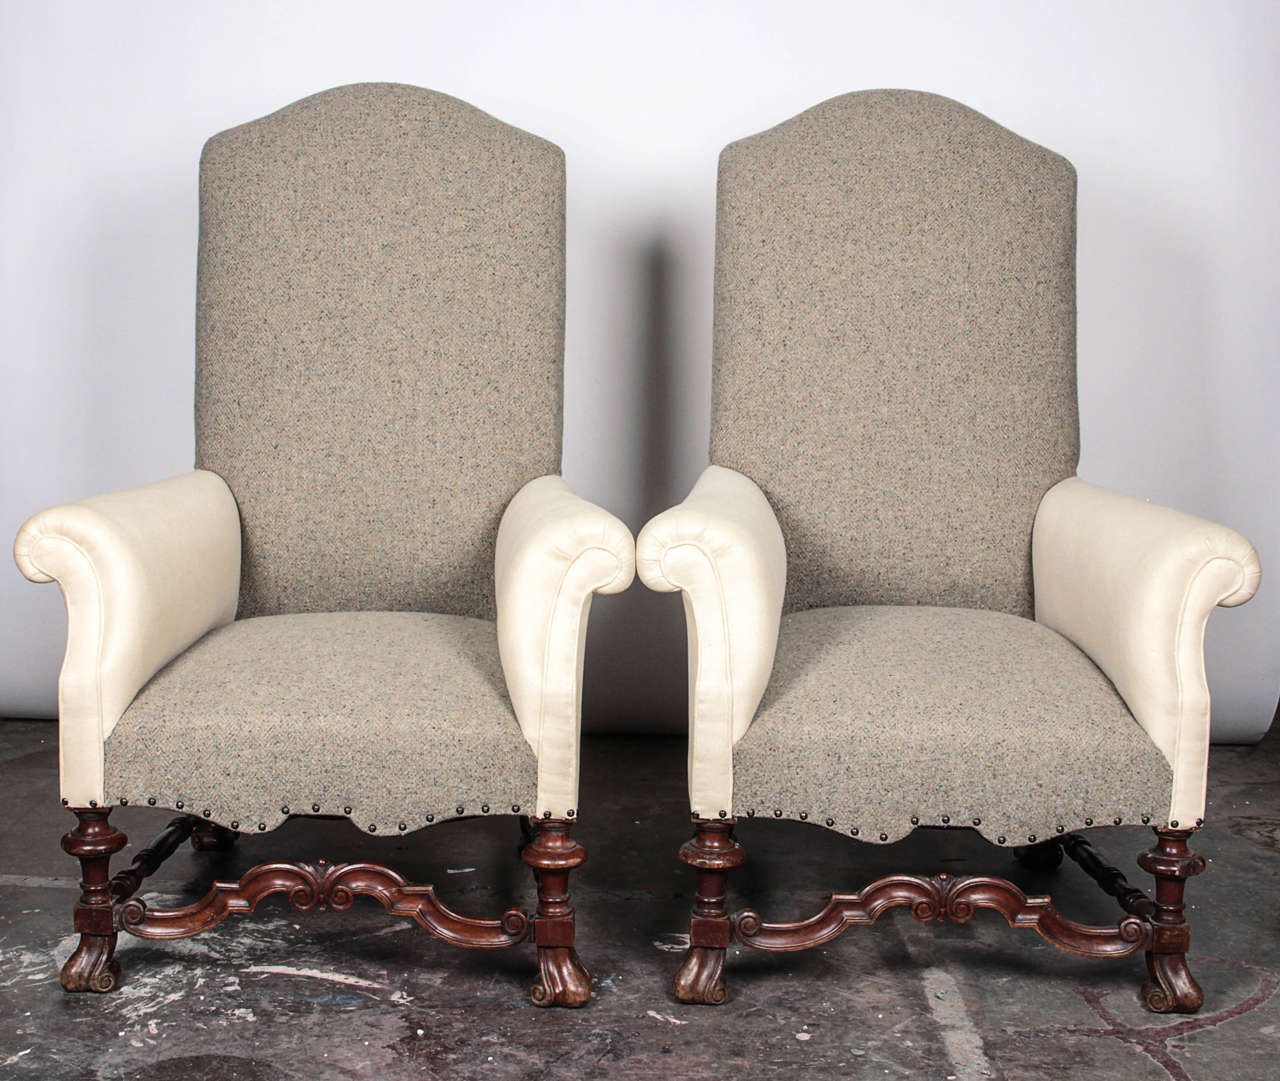 Pair of Queen Anne style armchairs with arched backrest, flared scroll arms, over carved blocked and turned legs joined by a molded arched stretcher. Covered in a combination of linen and wool fabrics with brass tack trim.

Not available for sale